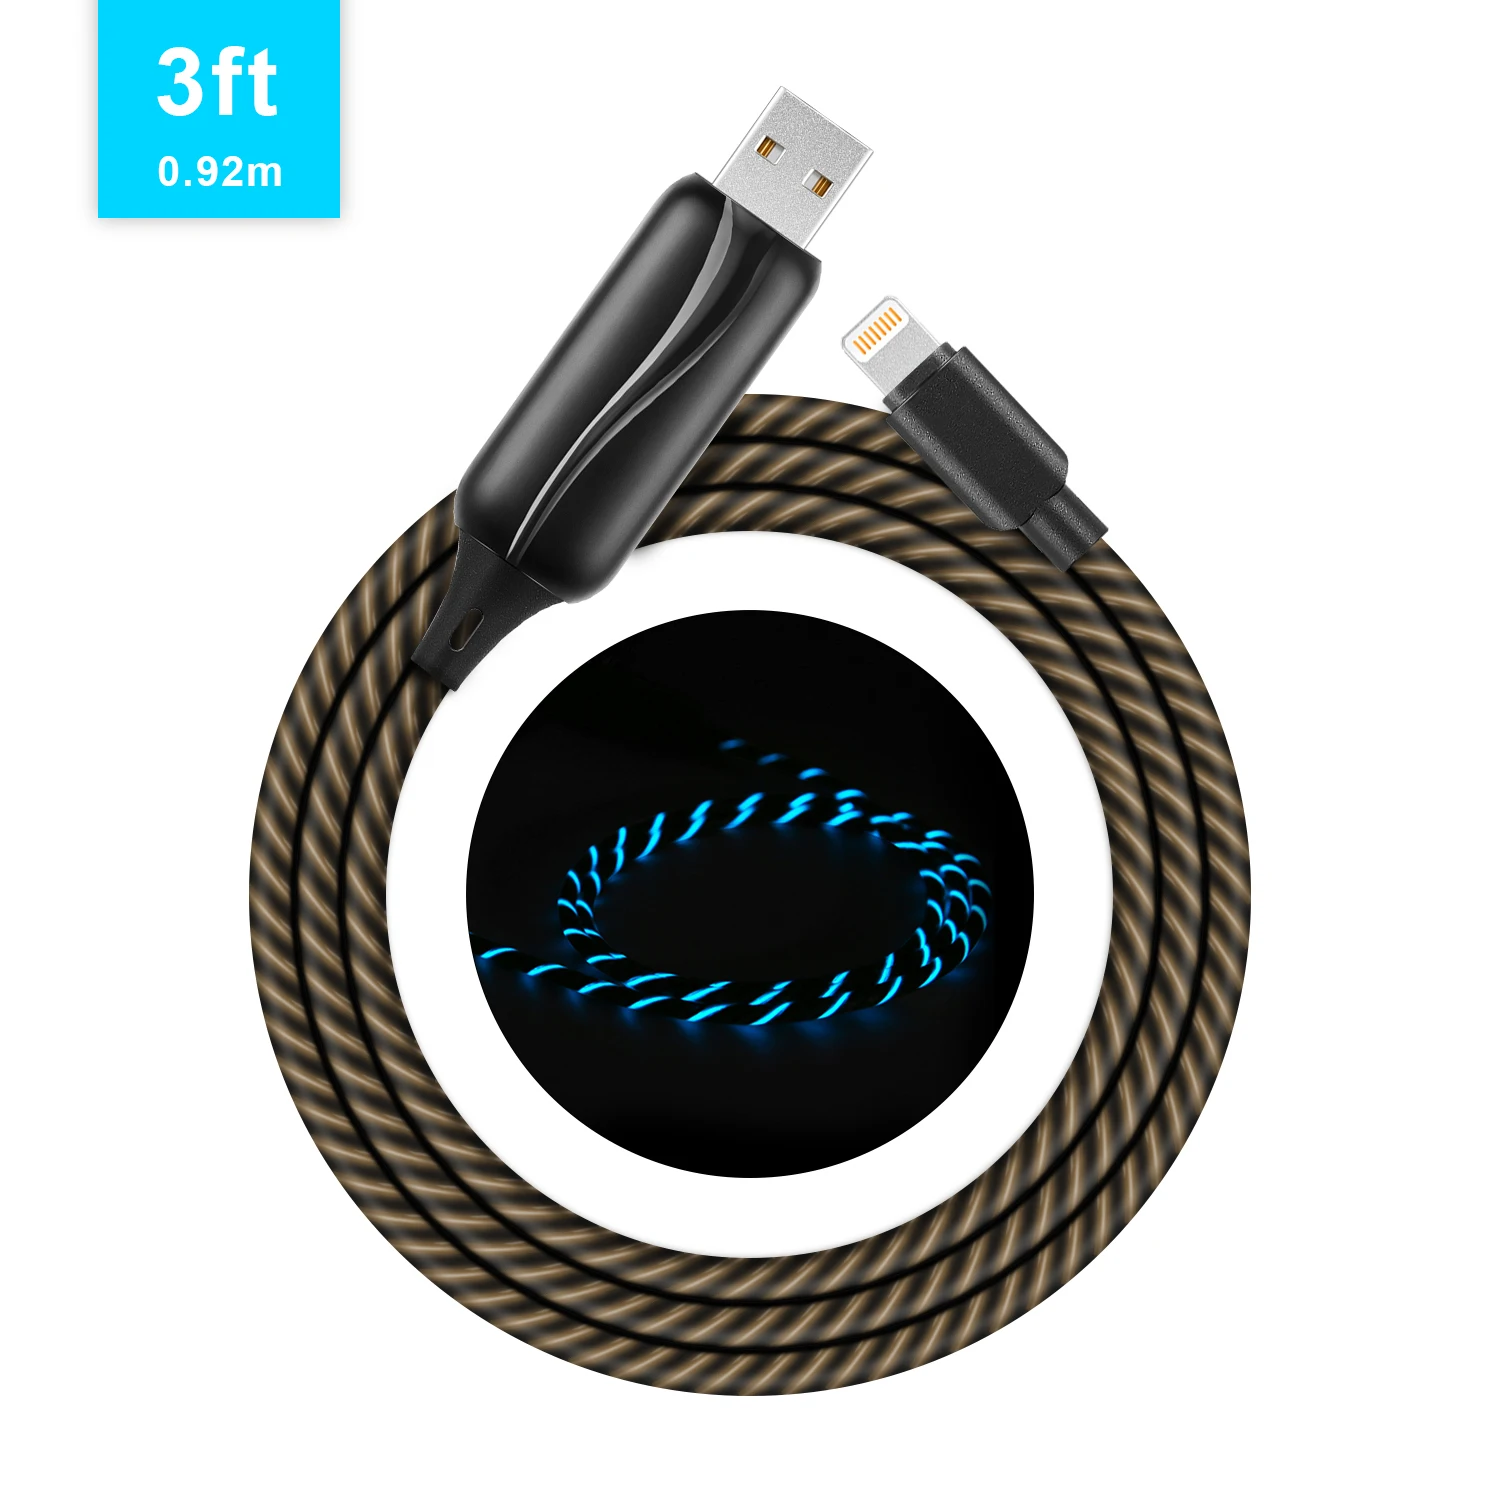 

Hot Sale! Original El Led Flowing Light Up Lightnings USB Cell Phone Charger Charging USB Data Sync Cable For Apple iPhone, Blue/black/white/pink